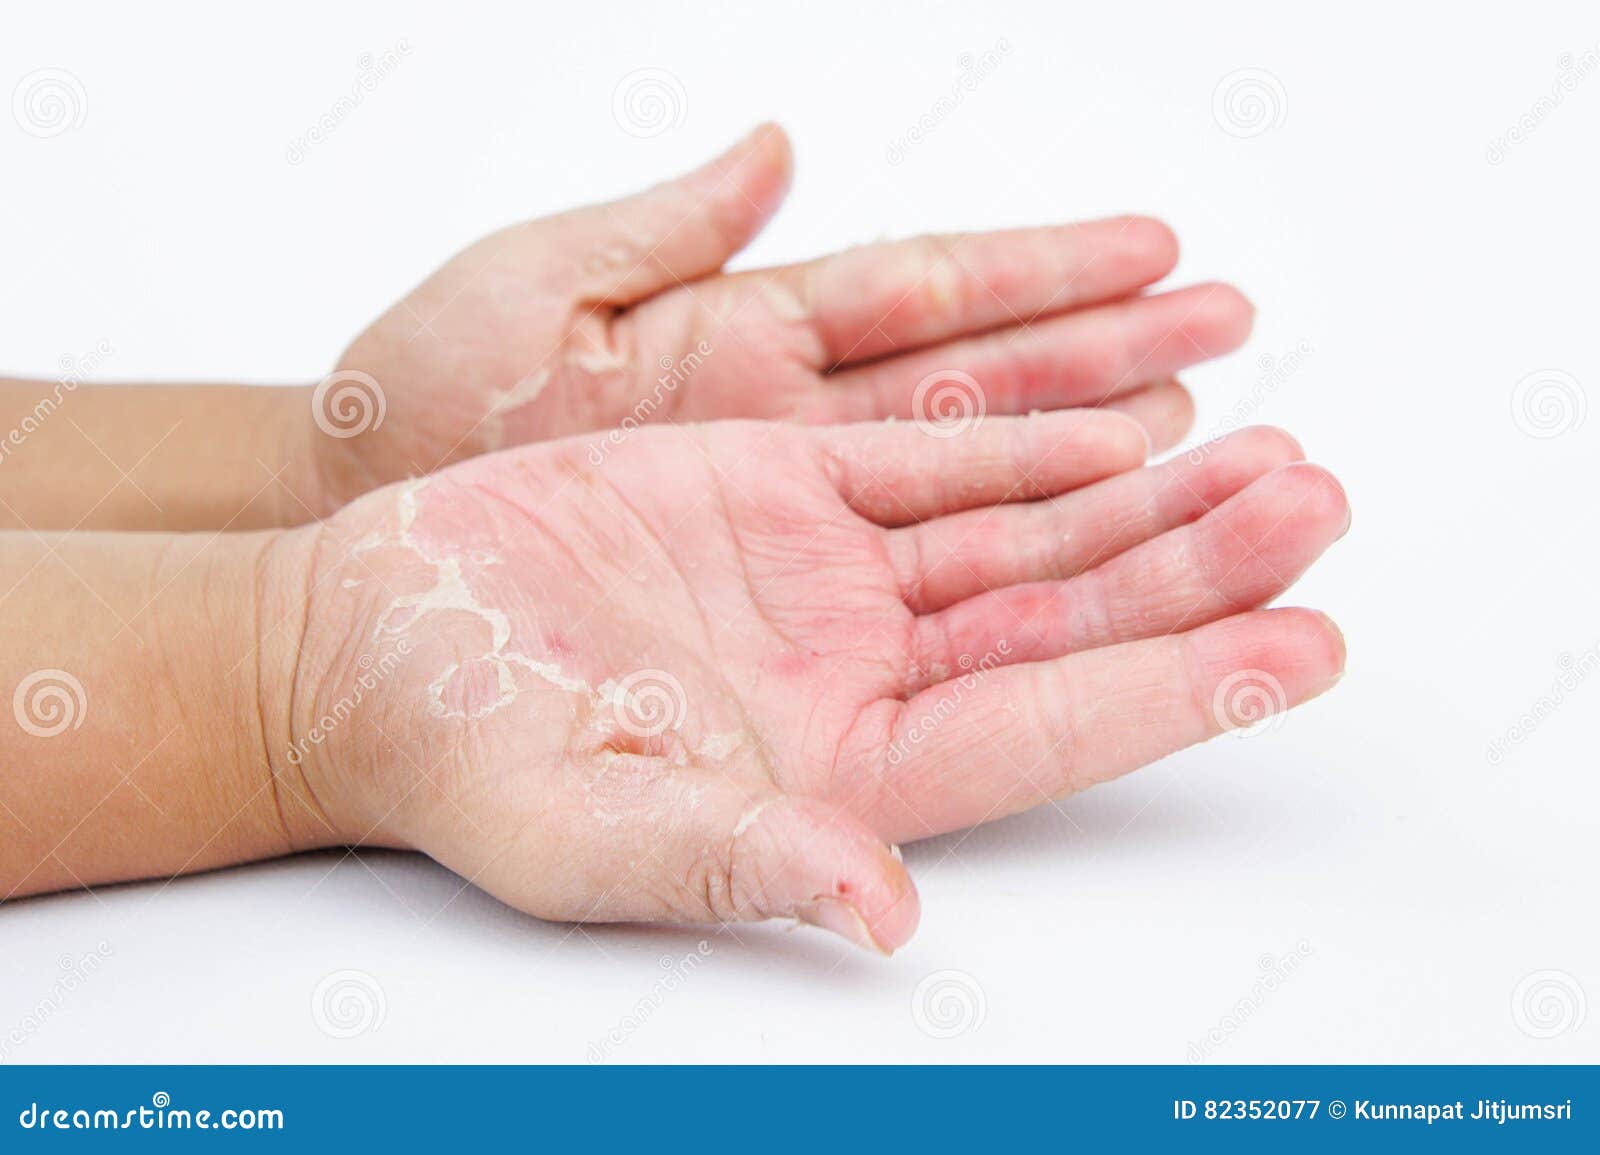 the dry hands, peel, contact dermatitis, fungal infections, skin inf